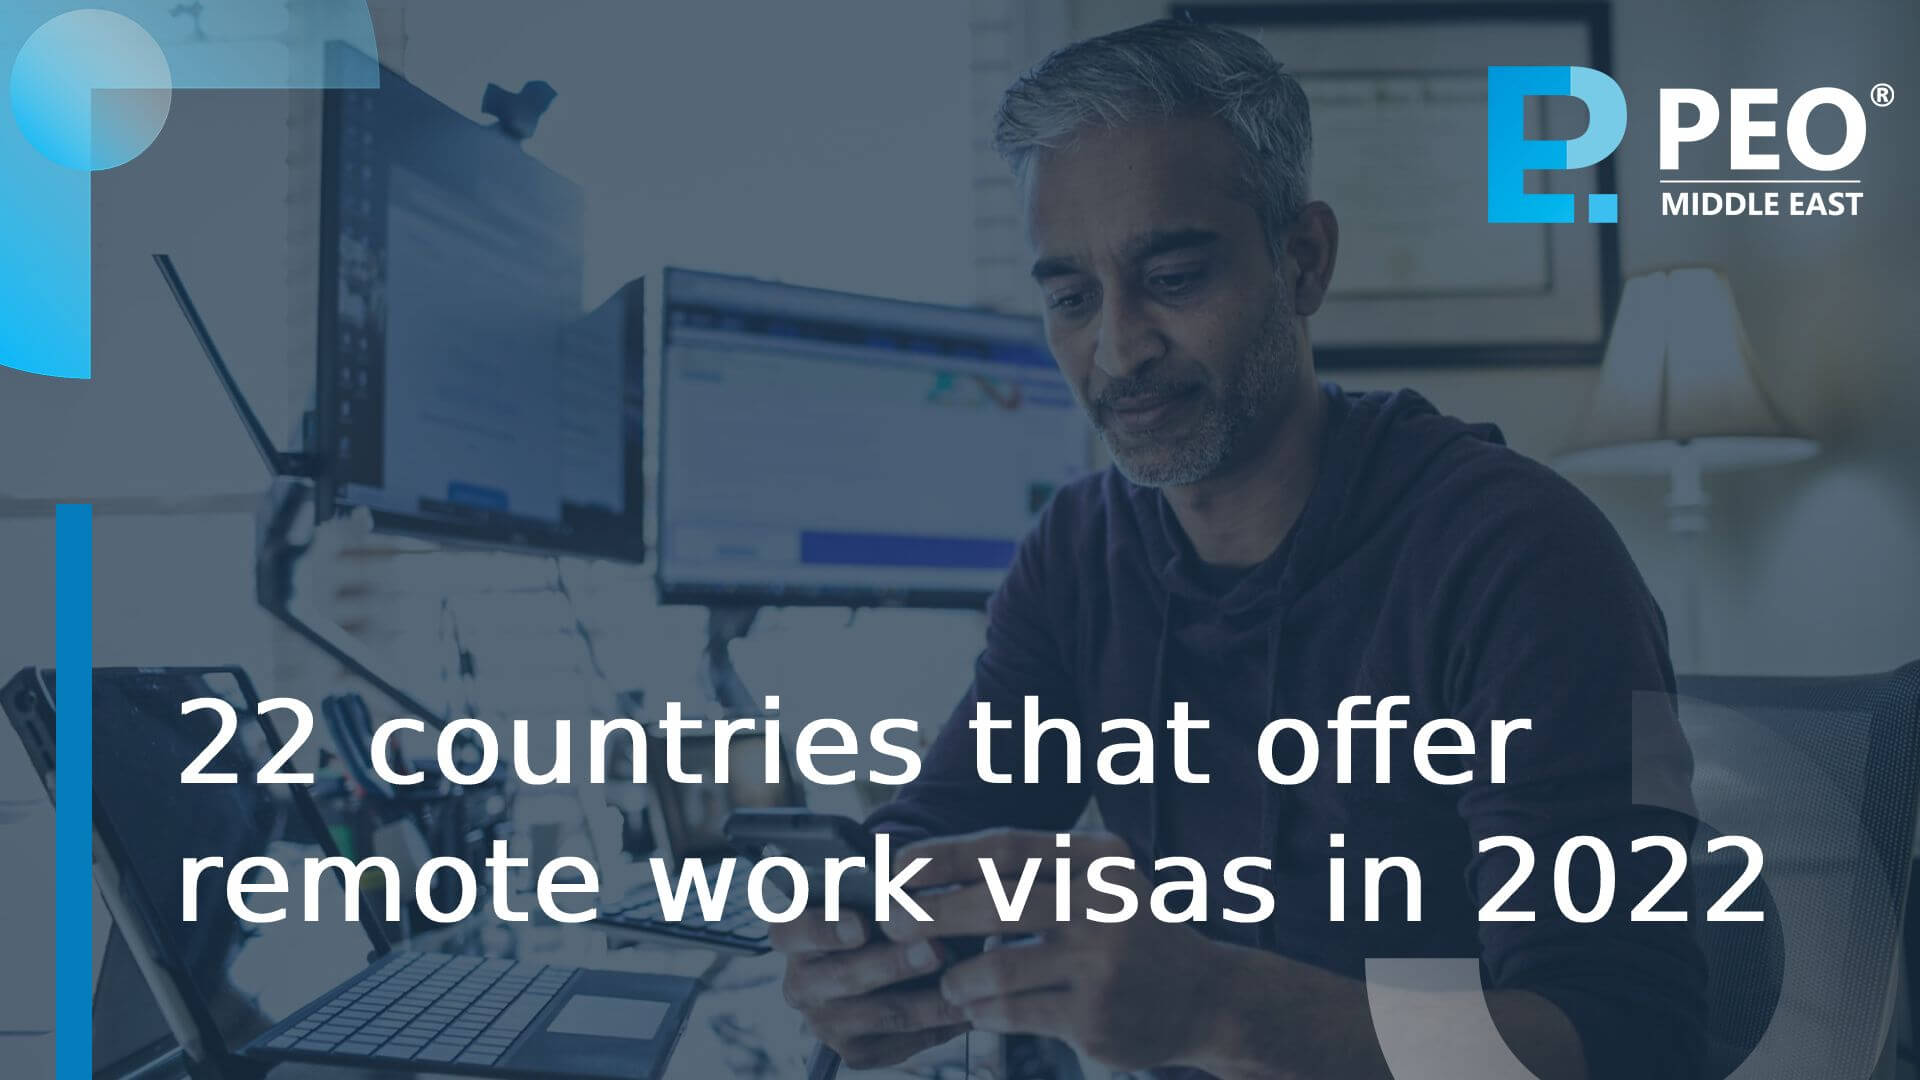 22 countries that offer remote work visas in 2022